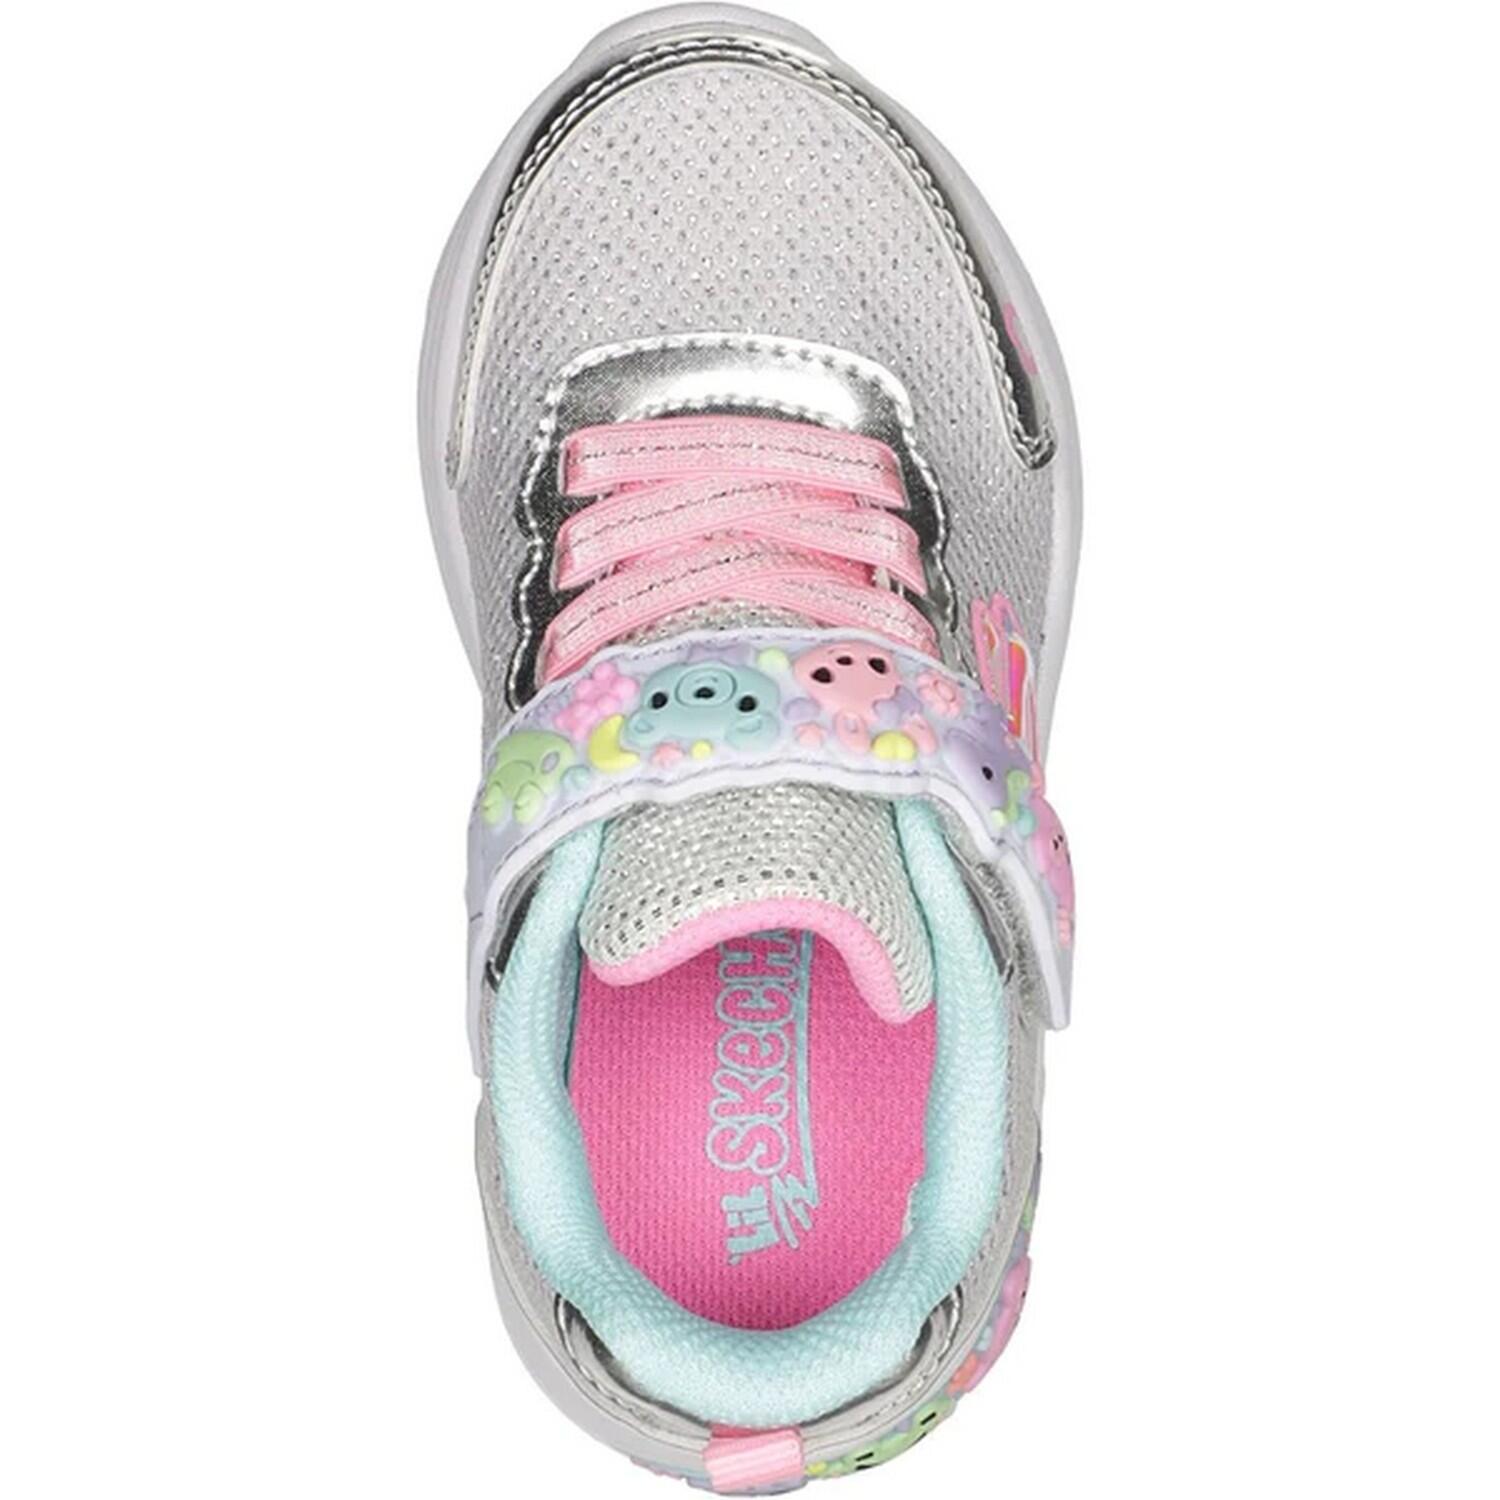 Girls My Dreamers Trainers (Silver/Multicoloured) 4/5